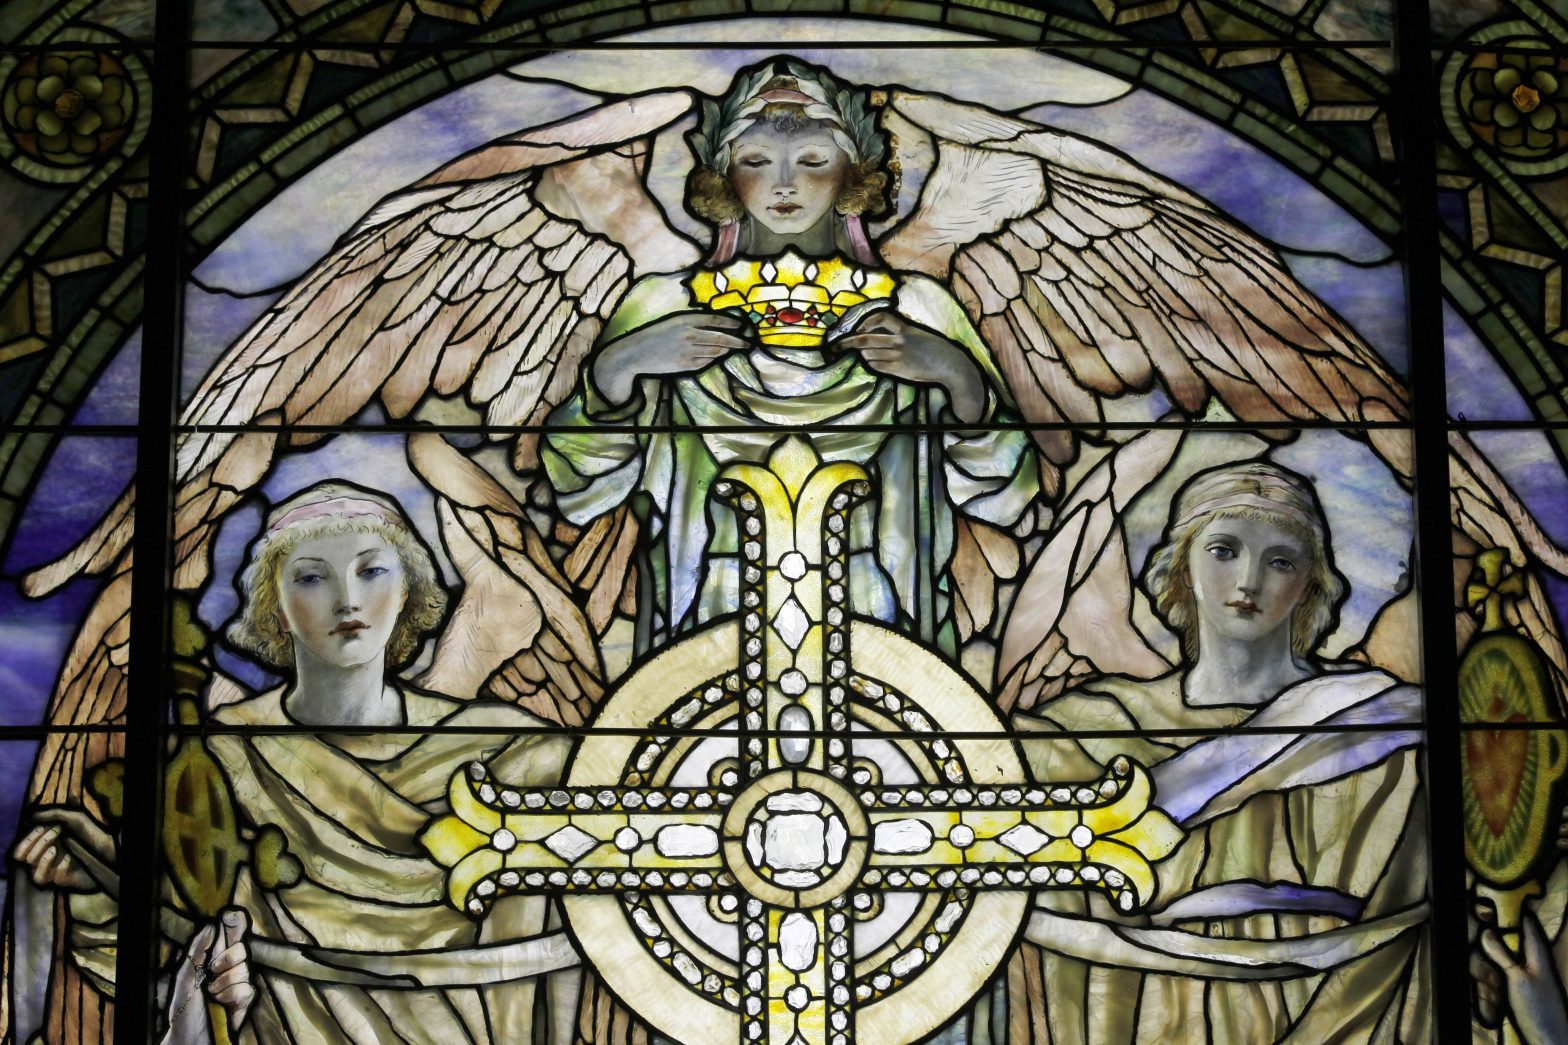 About Seven in 10 US Adults Believe in Angels, a New AP-NORC Poll Shows